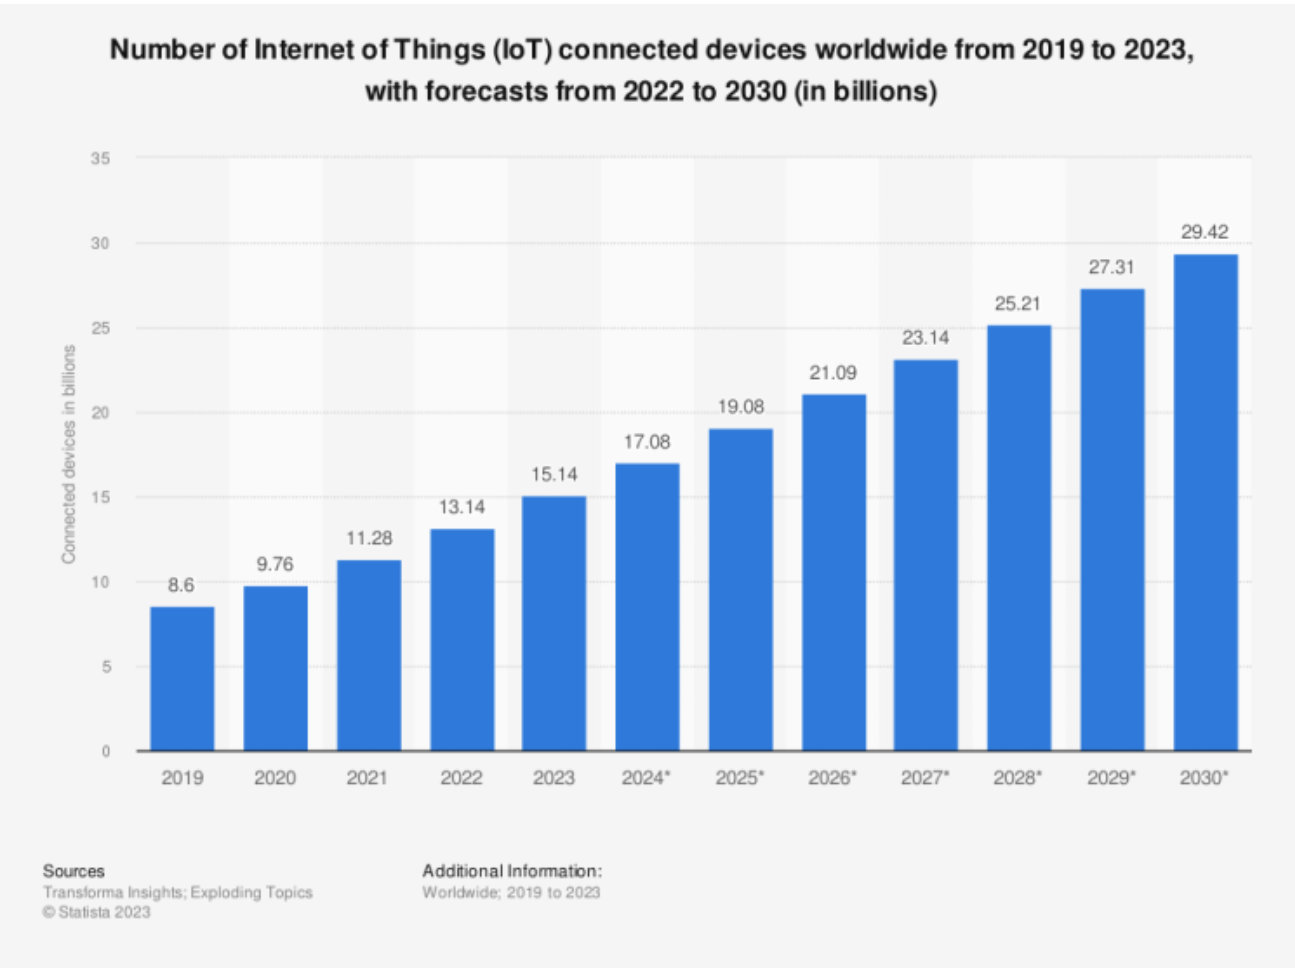 IoT connected devices from 2019 to 2030.